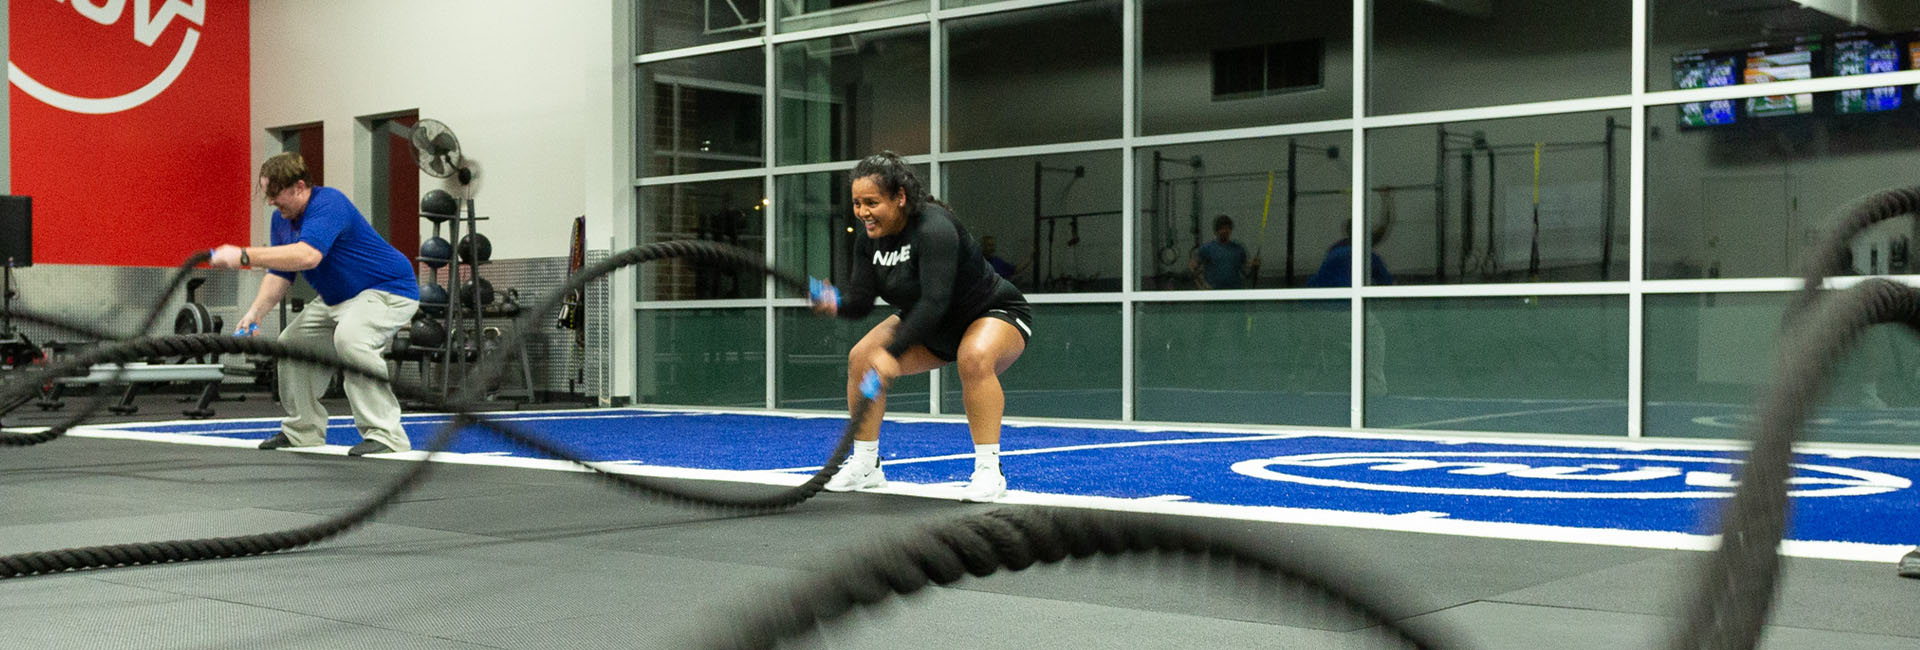 battle ropes being used by a man and woman exercising at a gym in north spokane